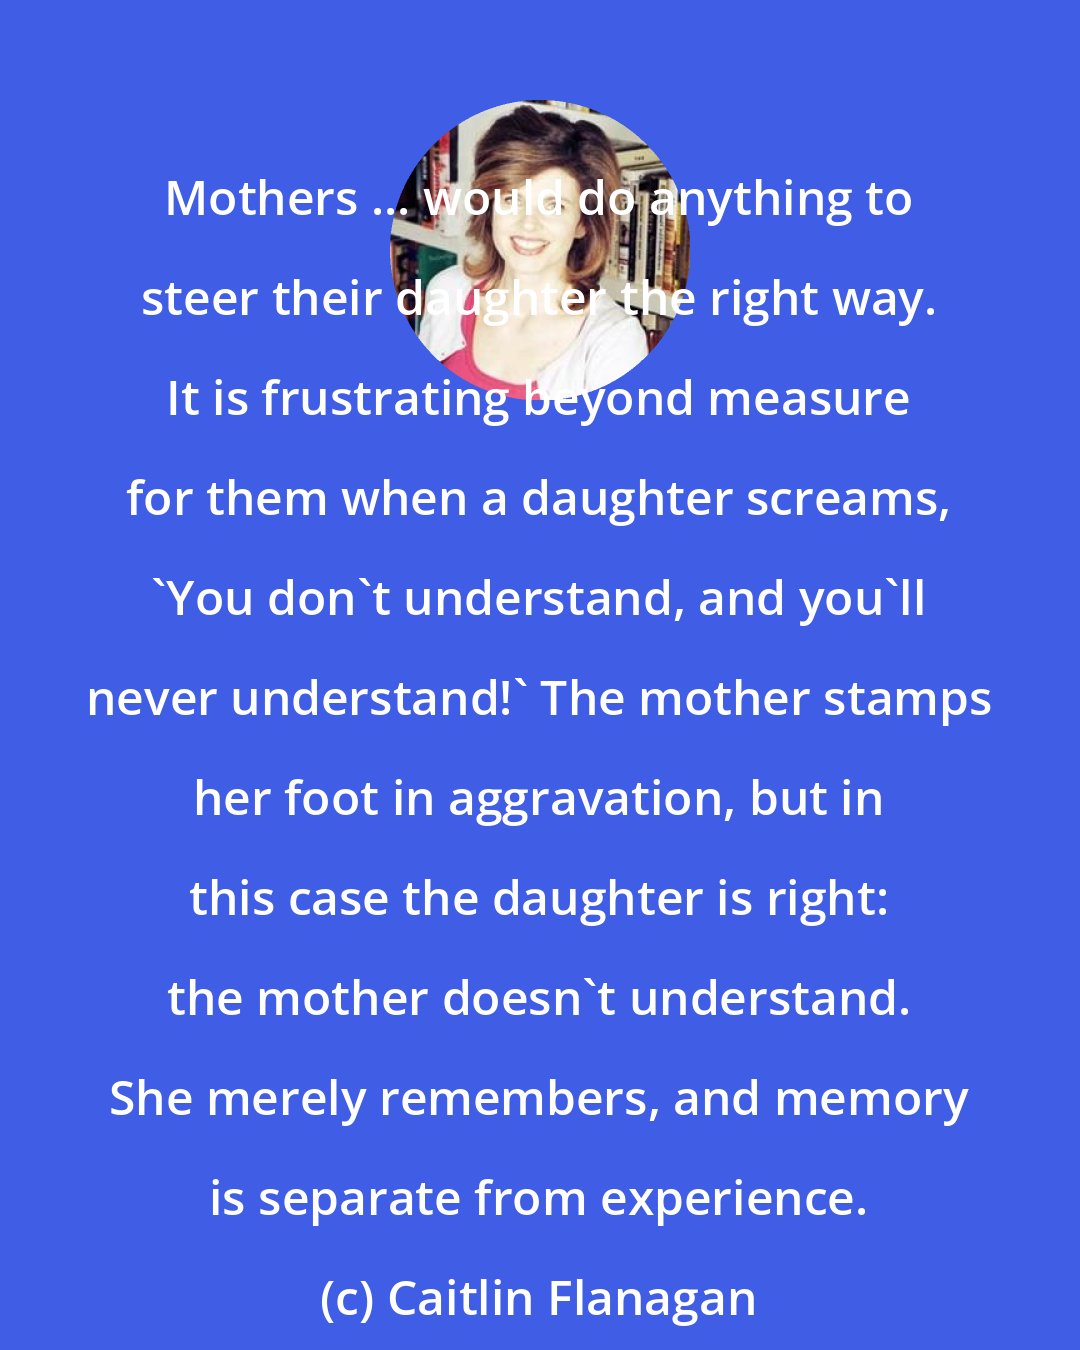 Caitlin Flanagan: Mothers ... would do anything to steer their daughter the right way. It is frustrating beyond measure for them when a daughter screams, 'You don't understand, and you'll never understand!' The mother stamps her foot in aggravation, but in this case the daughter is right: the mother doesn't understand. She merely remembers, and memory is separate from experience.